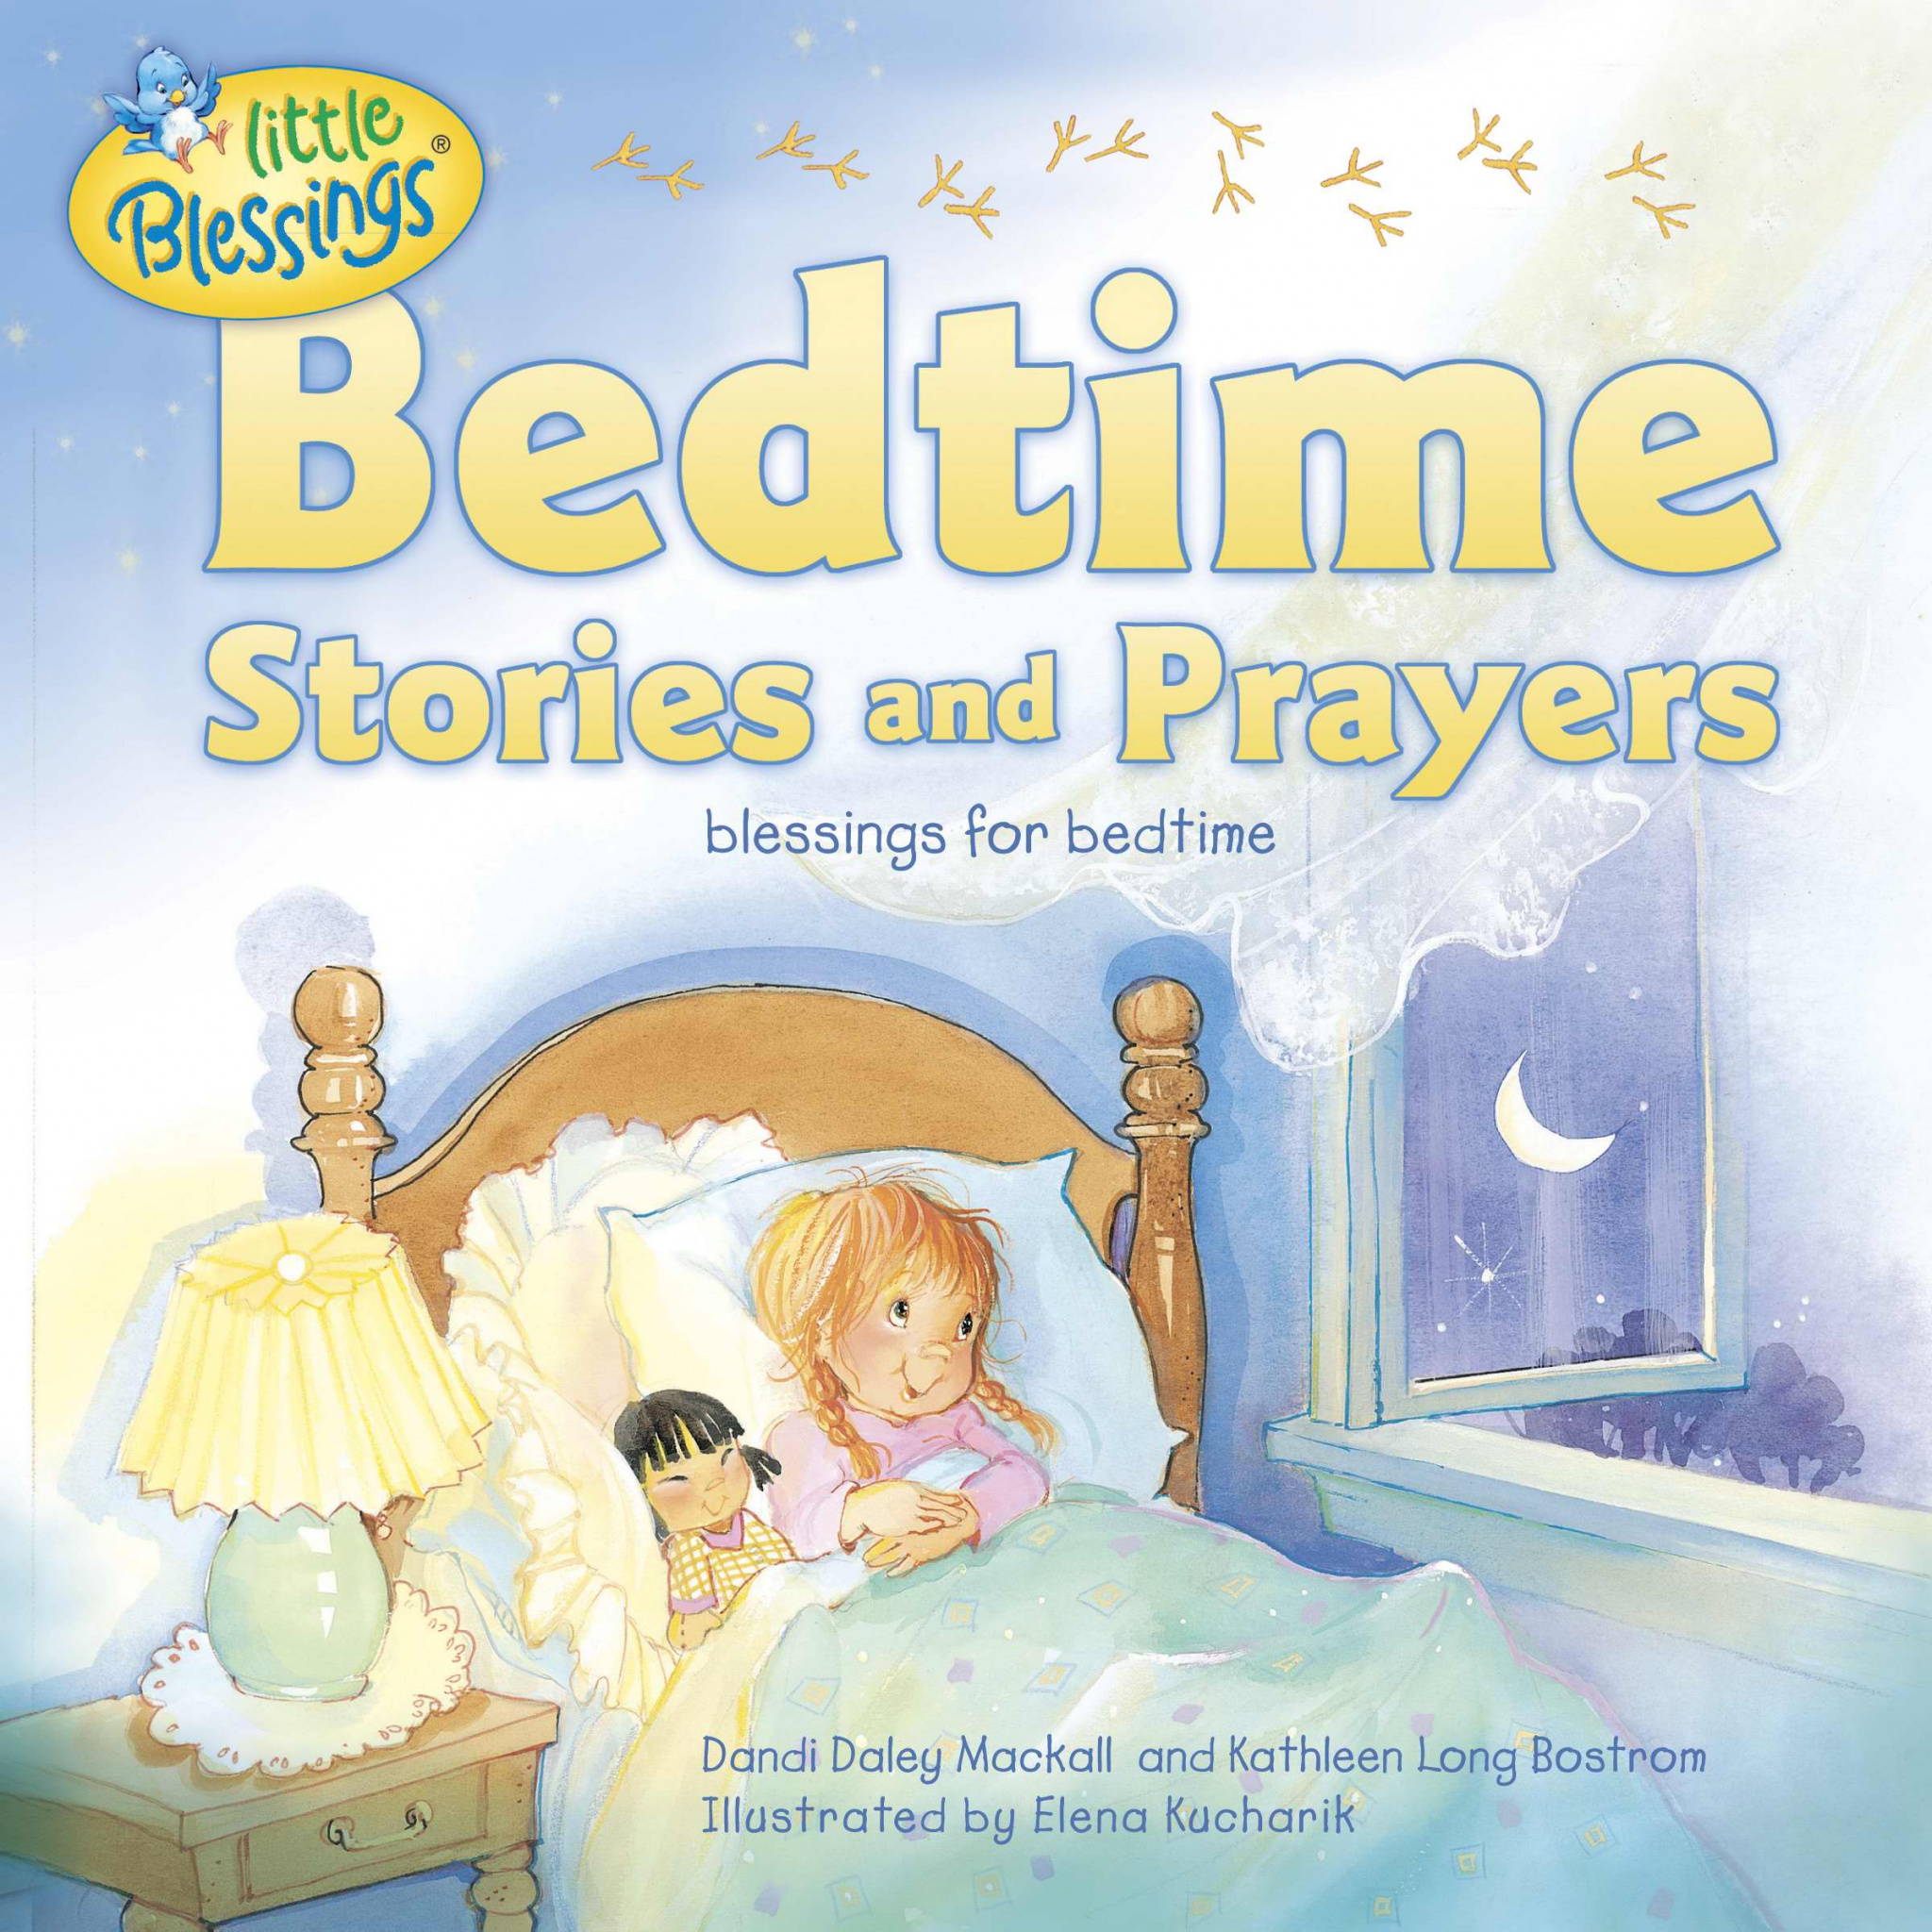 Bedtime Stories And Prayers Free Delivery Eden co uk